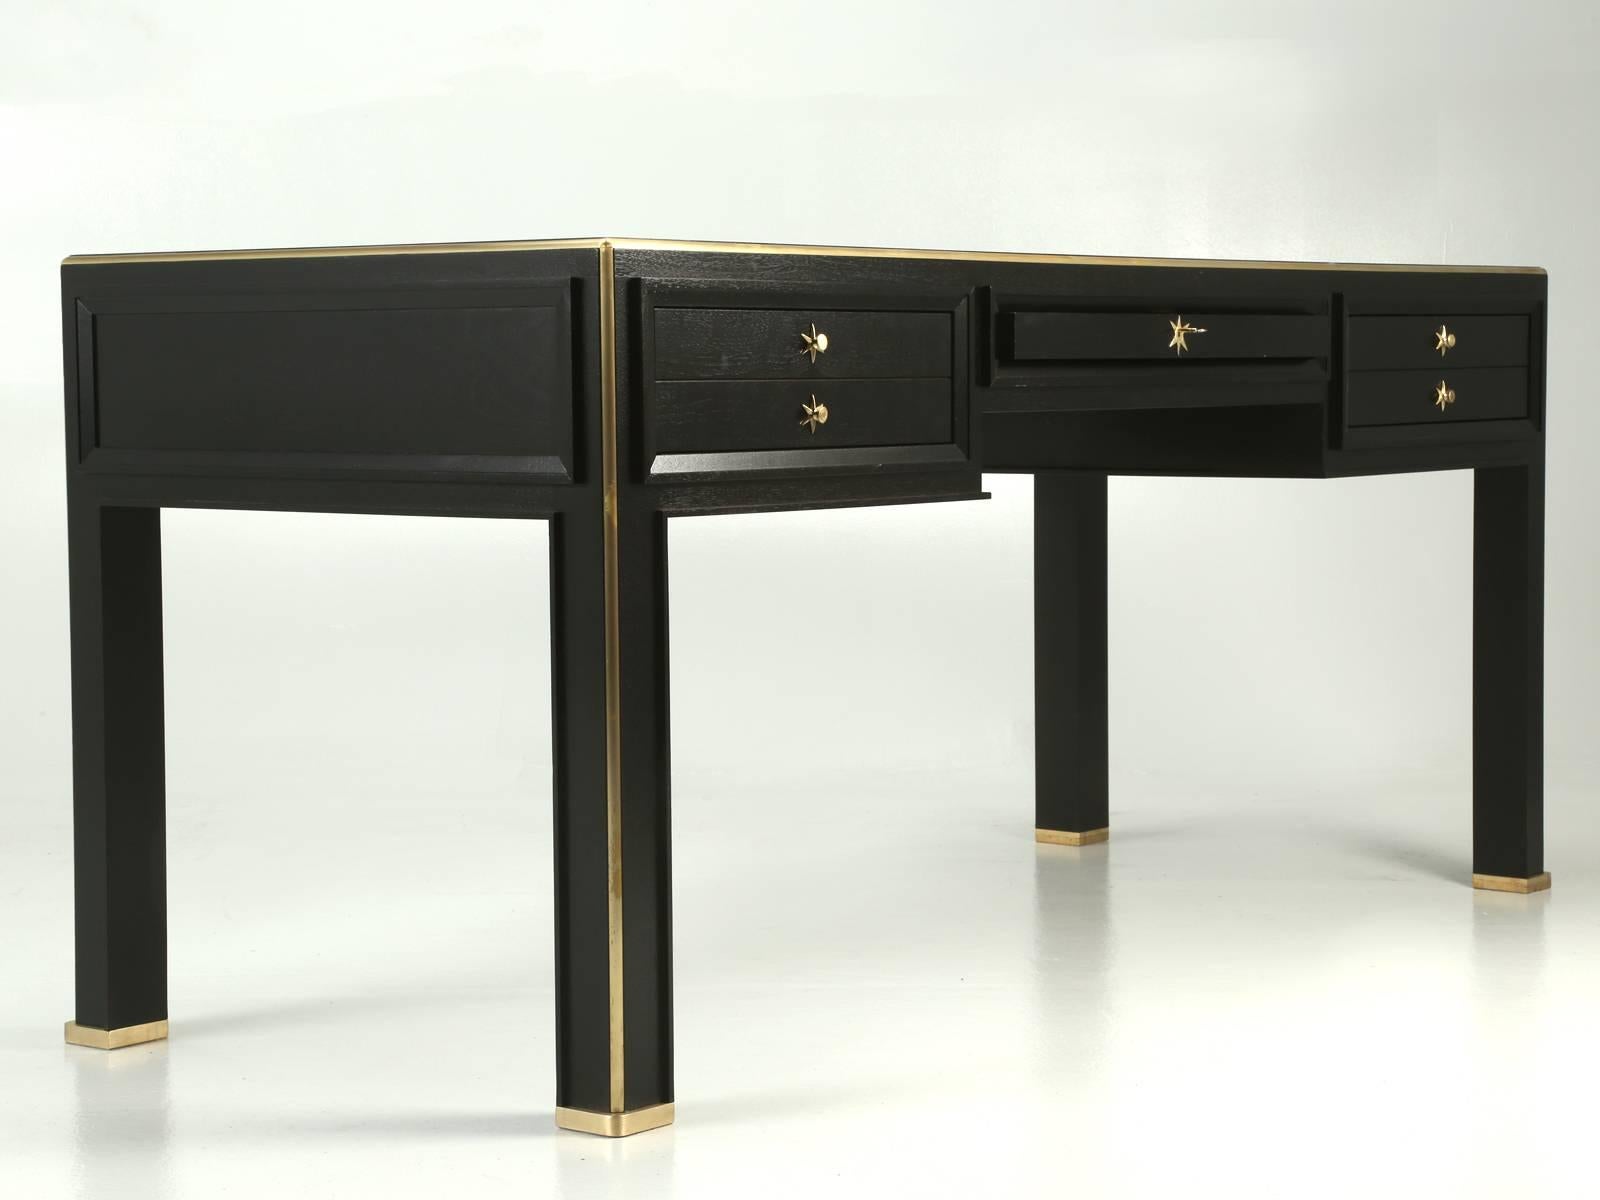 Recently constructed from our in house Old Plank workshop, this particular Jacques Adnet inspired desk, was made from solid mahogany that we ebonized. The large quarter round trim is solid brass that we machined to fit precisely and the leather top